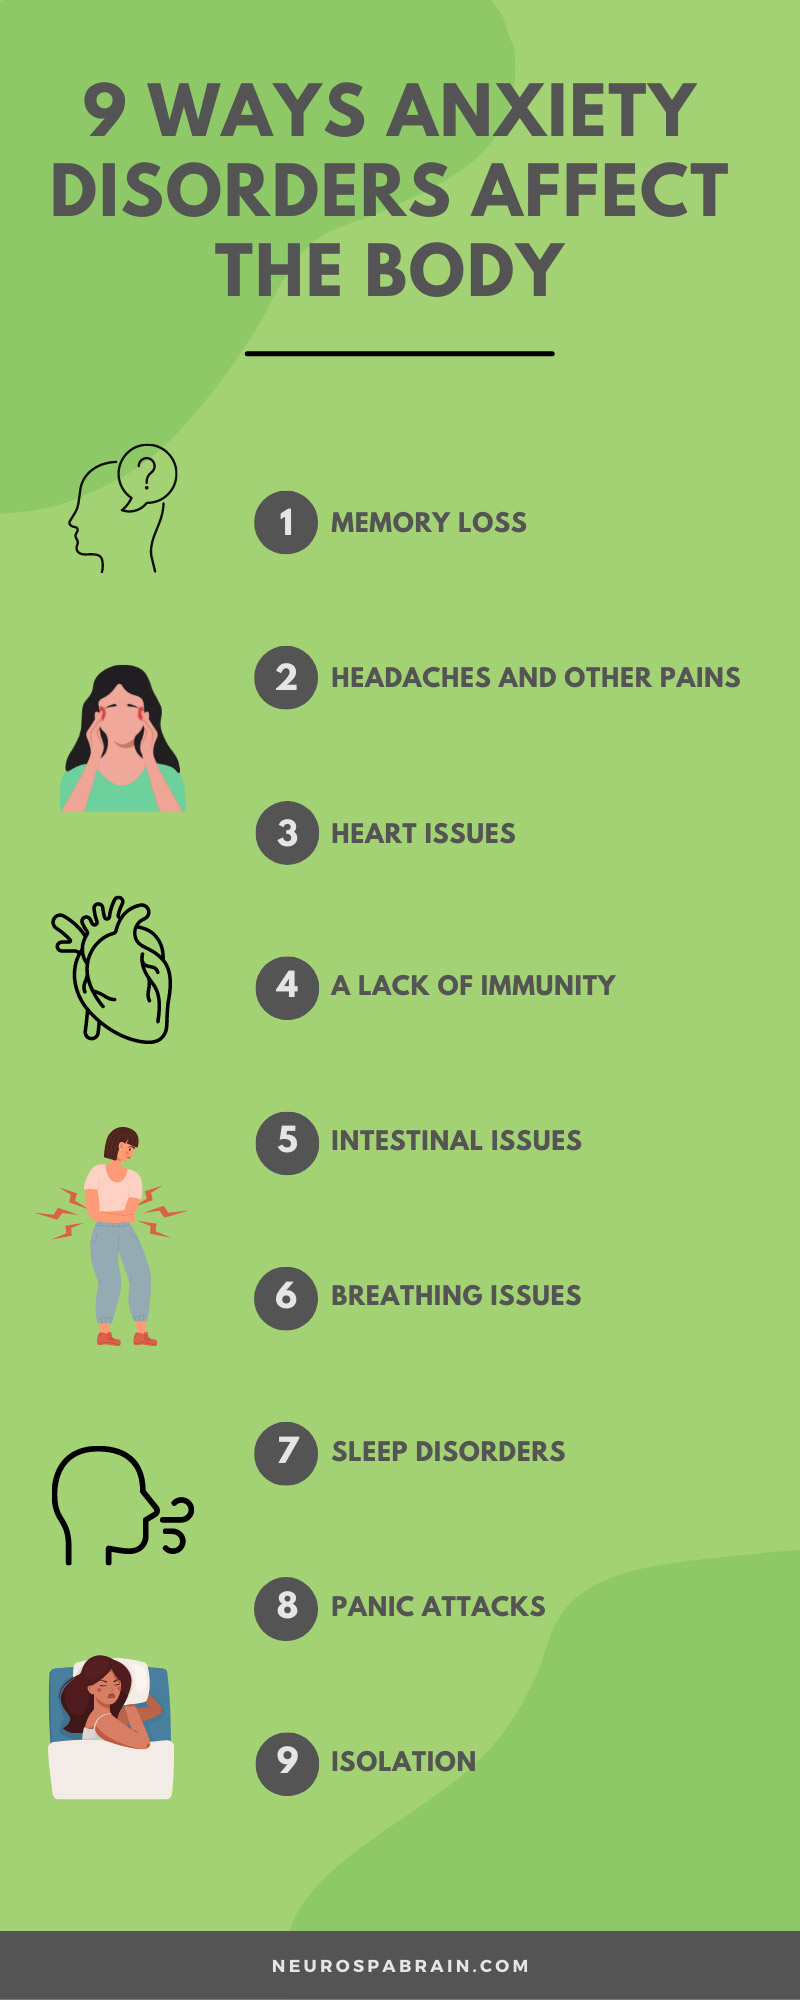 9 Ways Anxiety Disorders Affect the Body